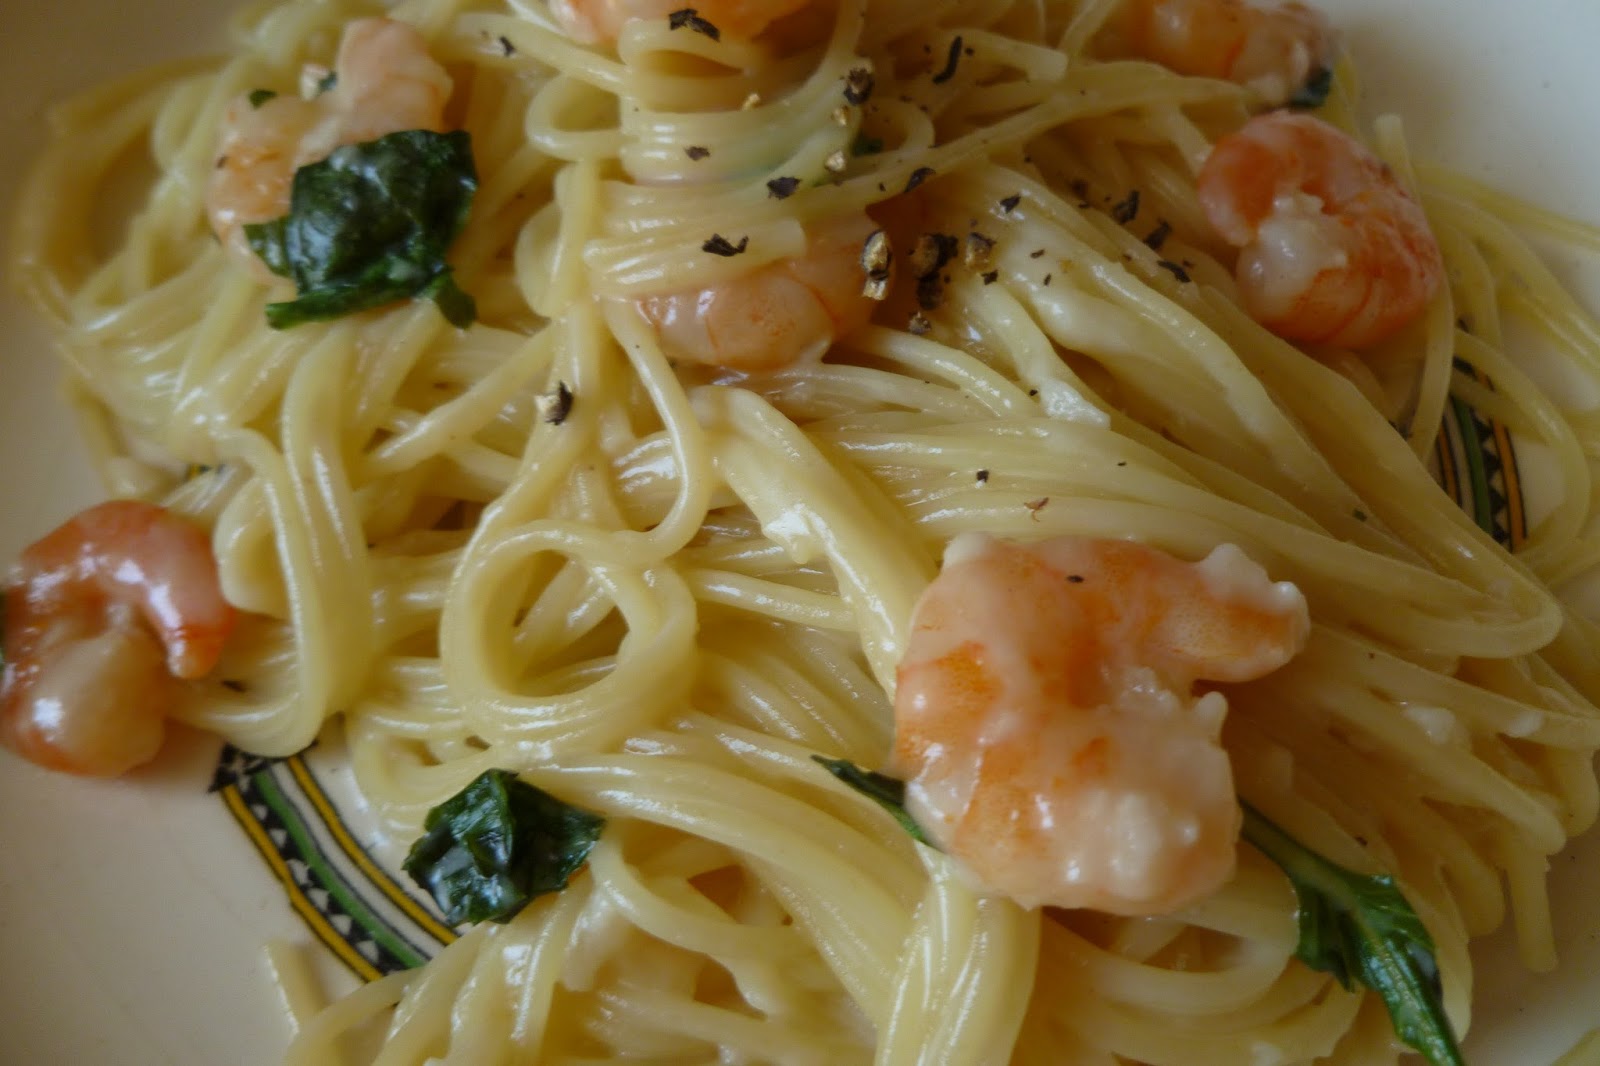 The Pastry Chef's Baking: Parmesan Garlic Noodles with Shrimp